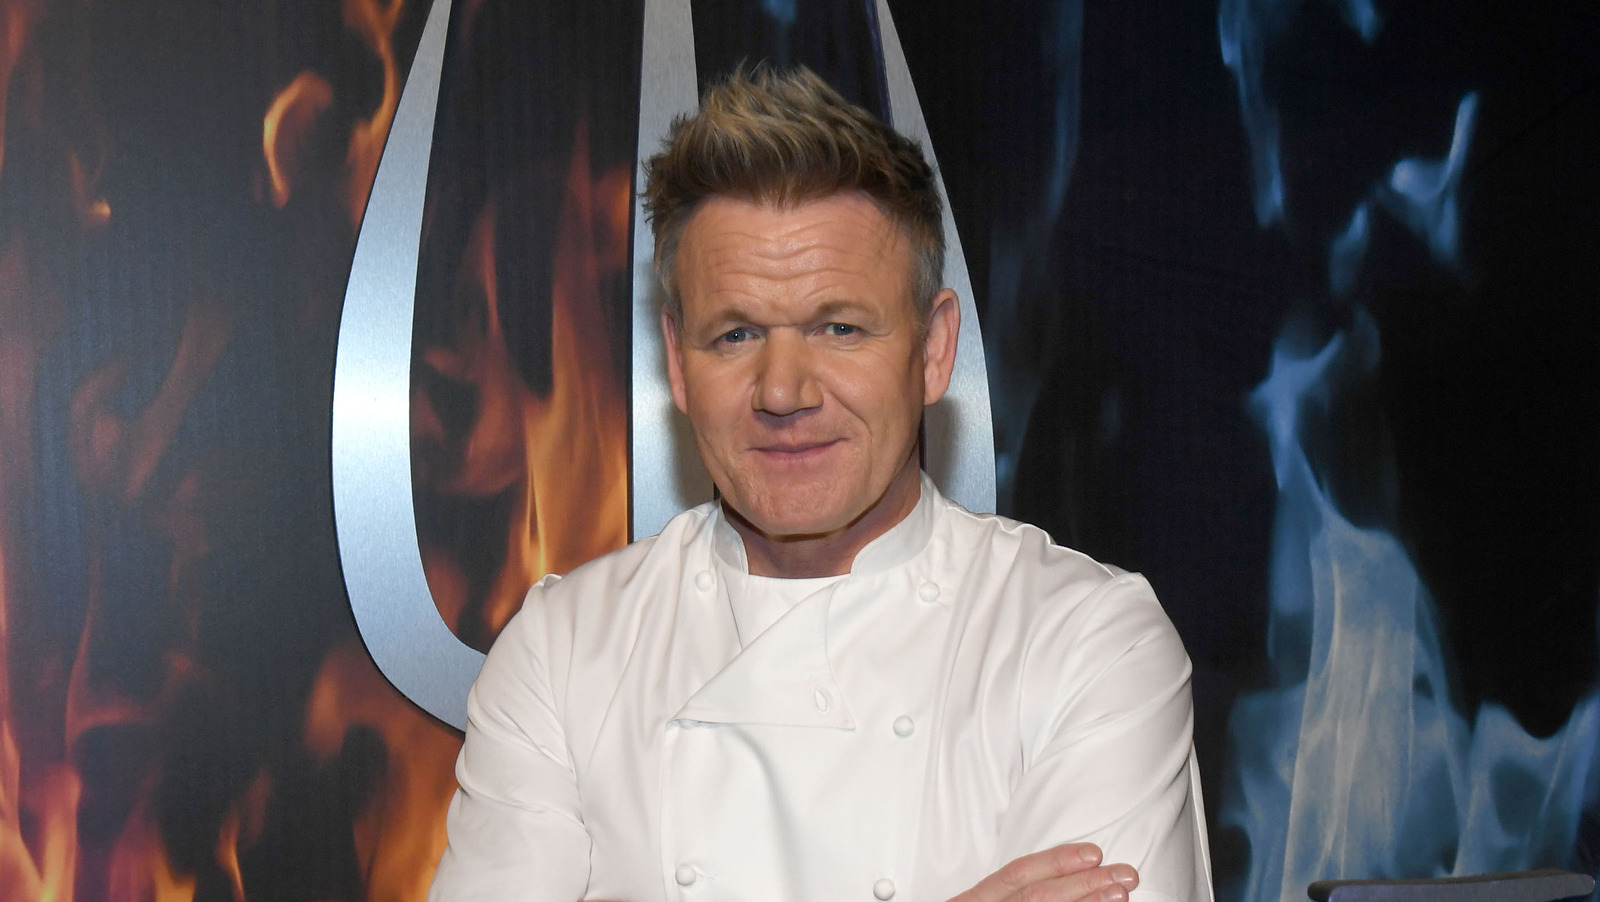 Who Taught Gordon Ramsay To Cook bazaarstory